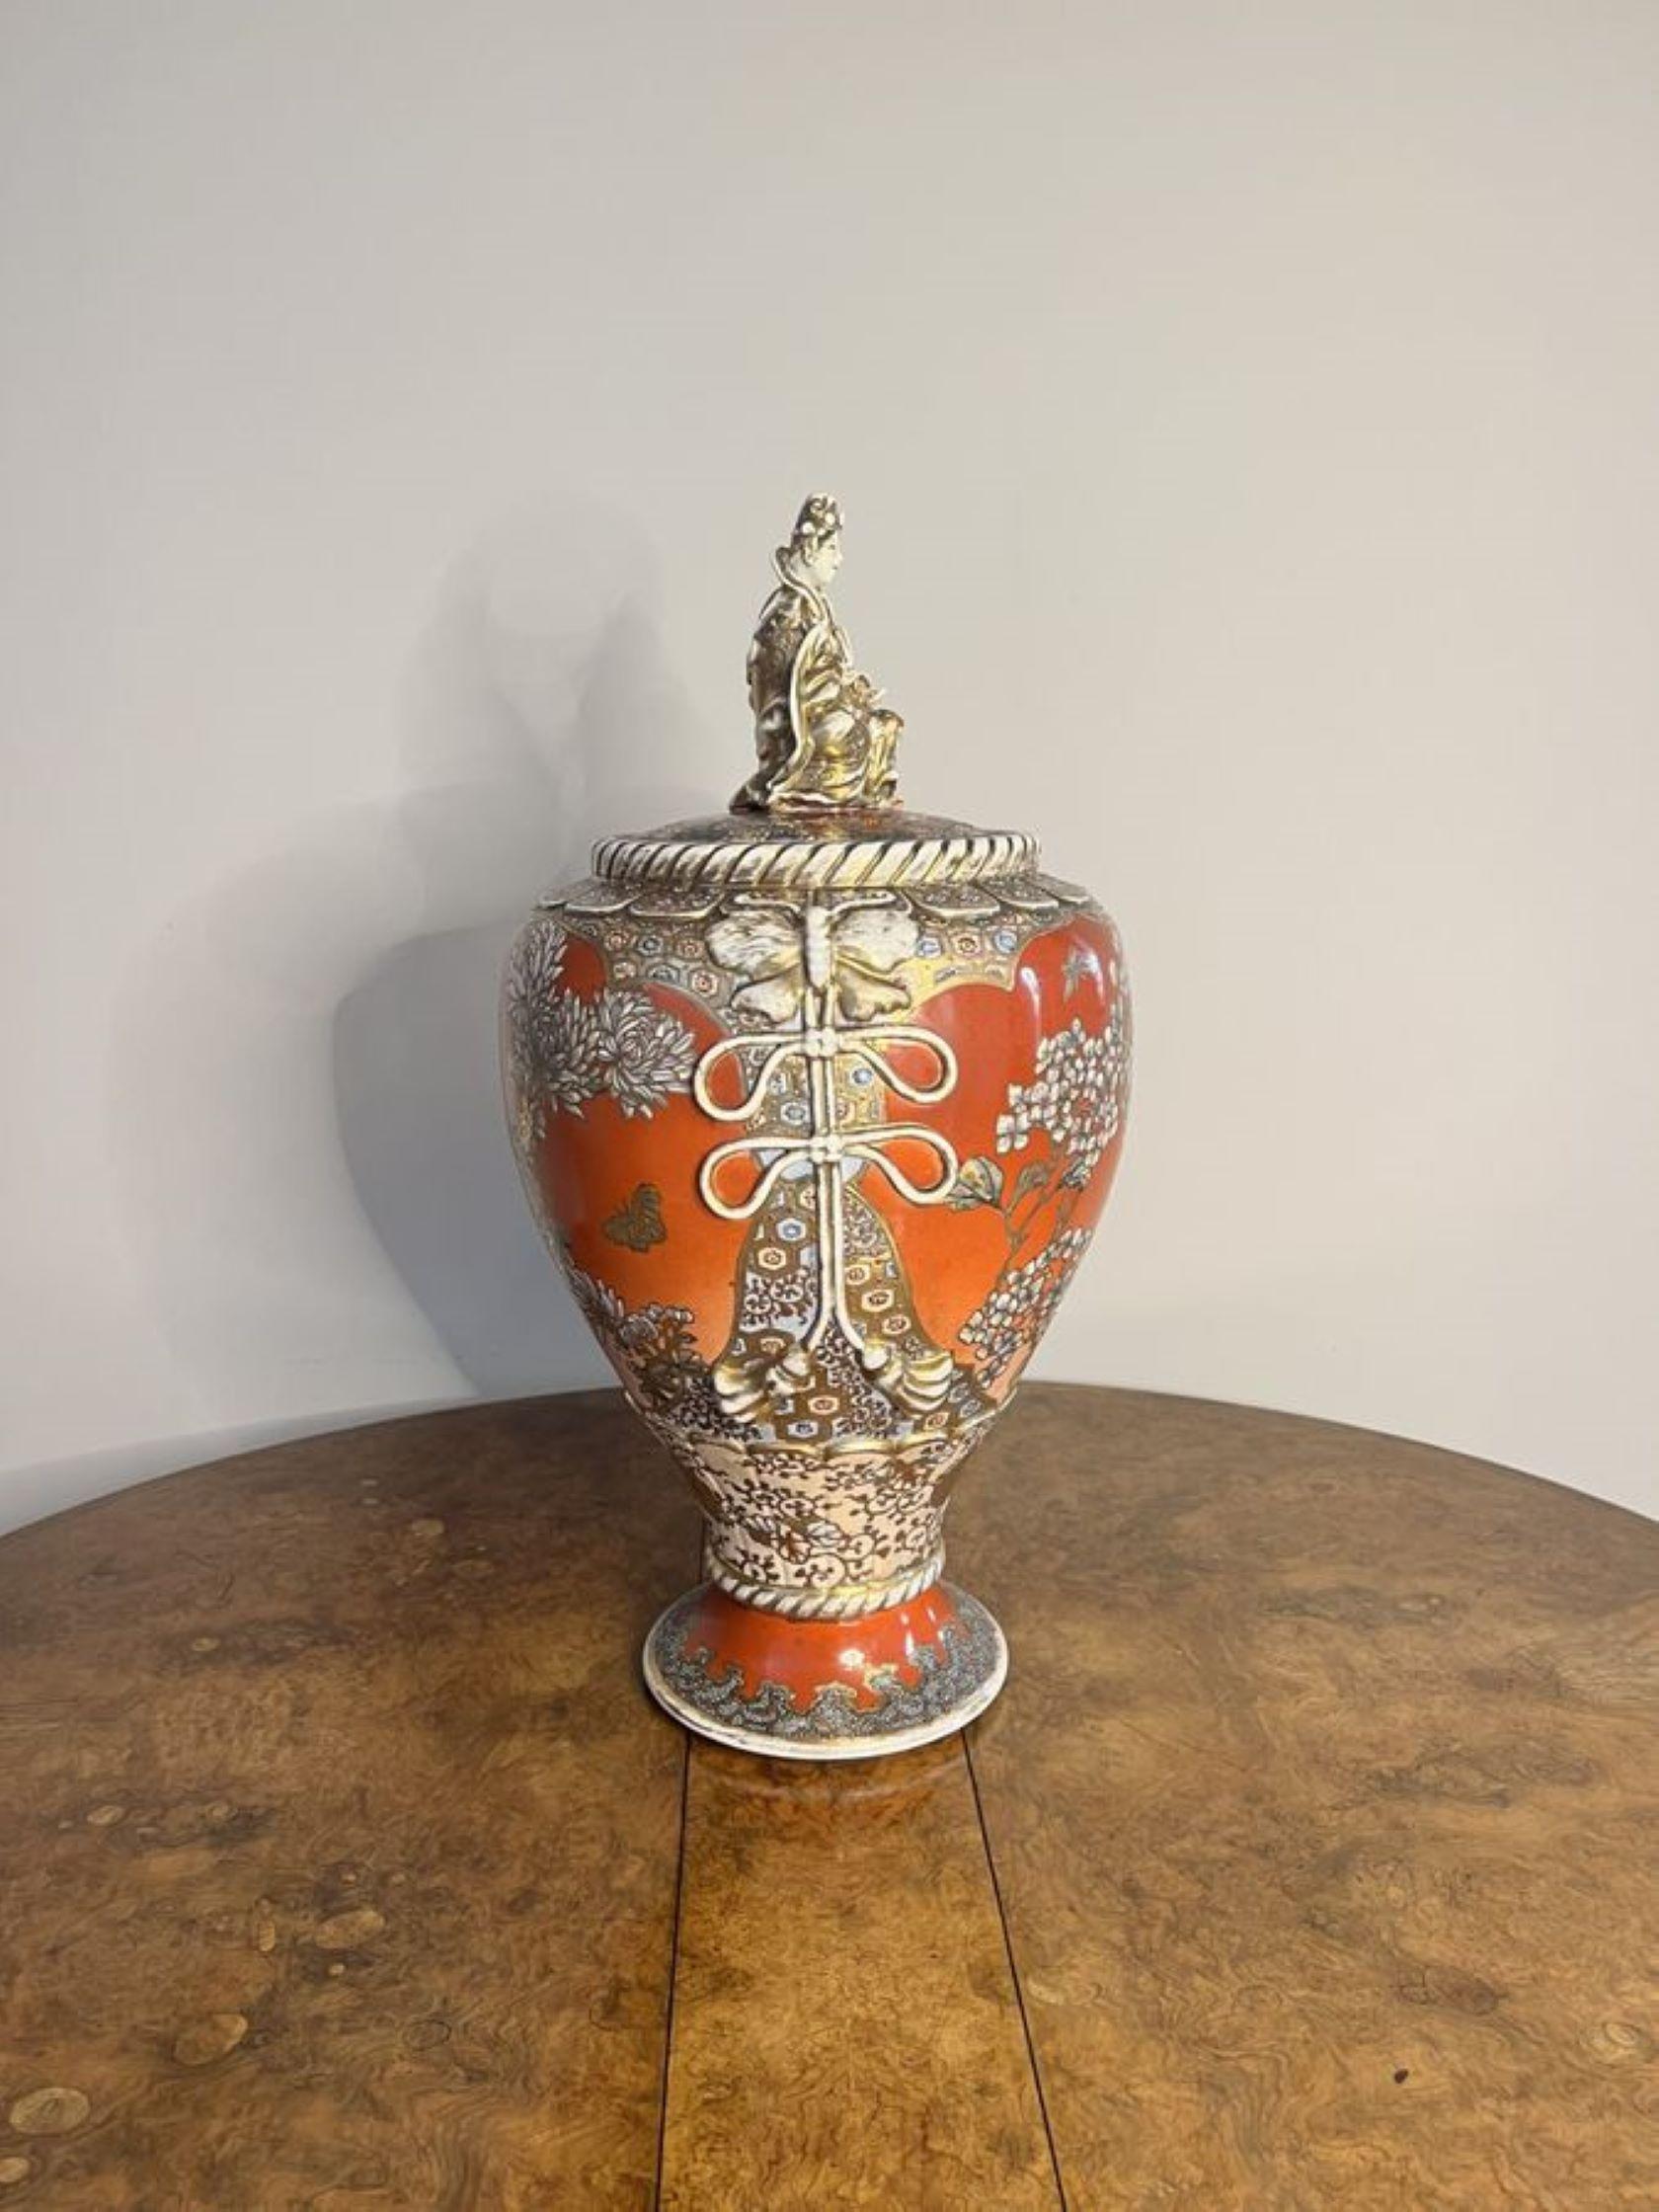 Quality large antique Japanese satsuma lidded vase, having a fantastic large antique satsuma vase decorated with flowers, trees and insects with gilt detail, raised on a circular base, having a removable lid with a figural finale (figure has had a